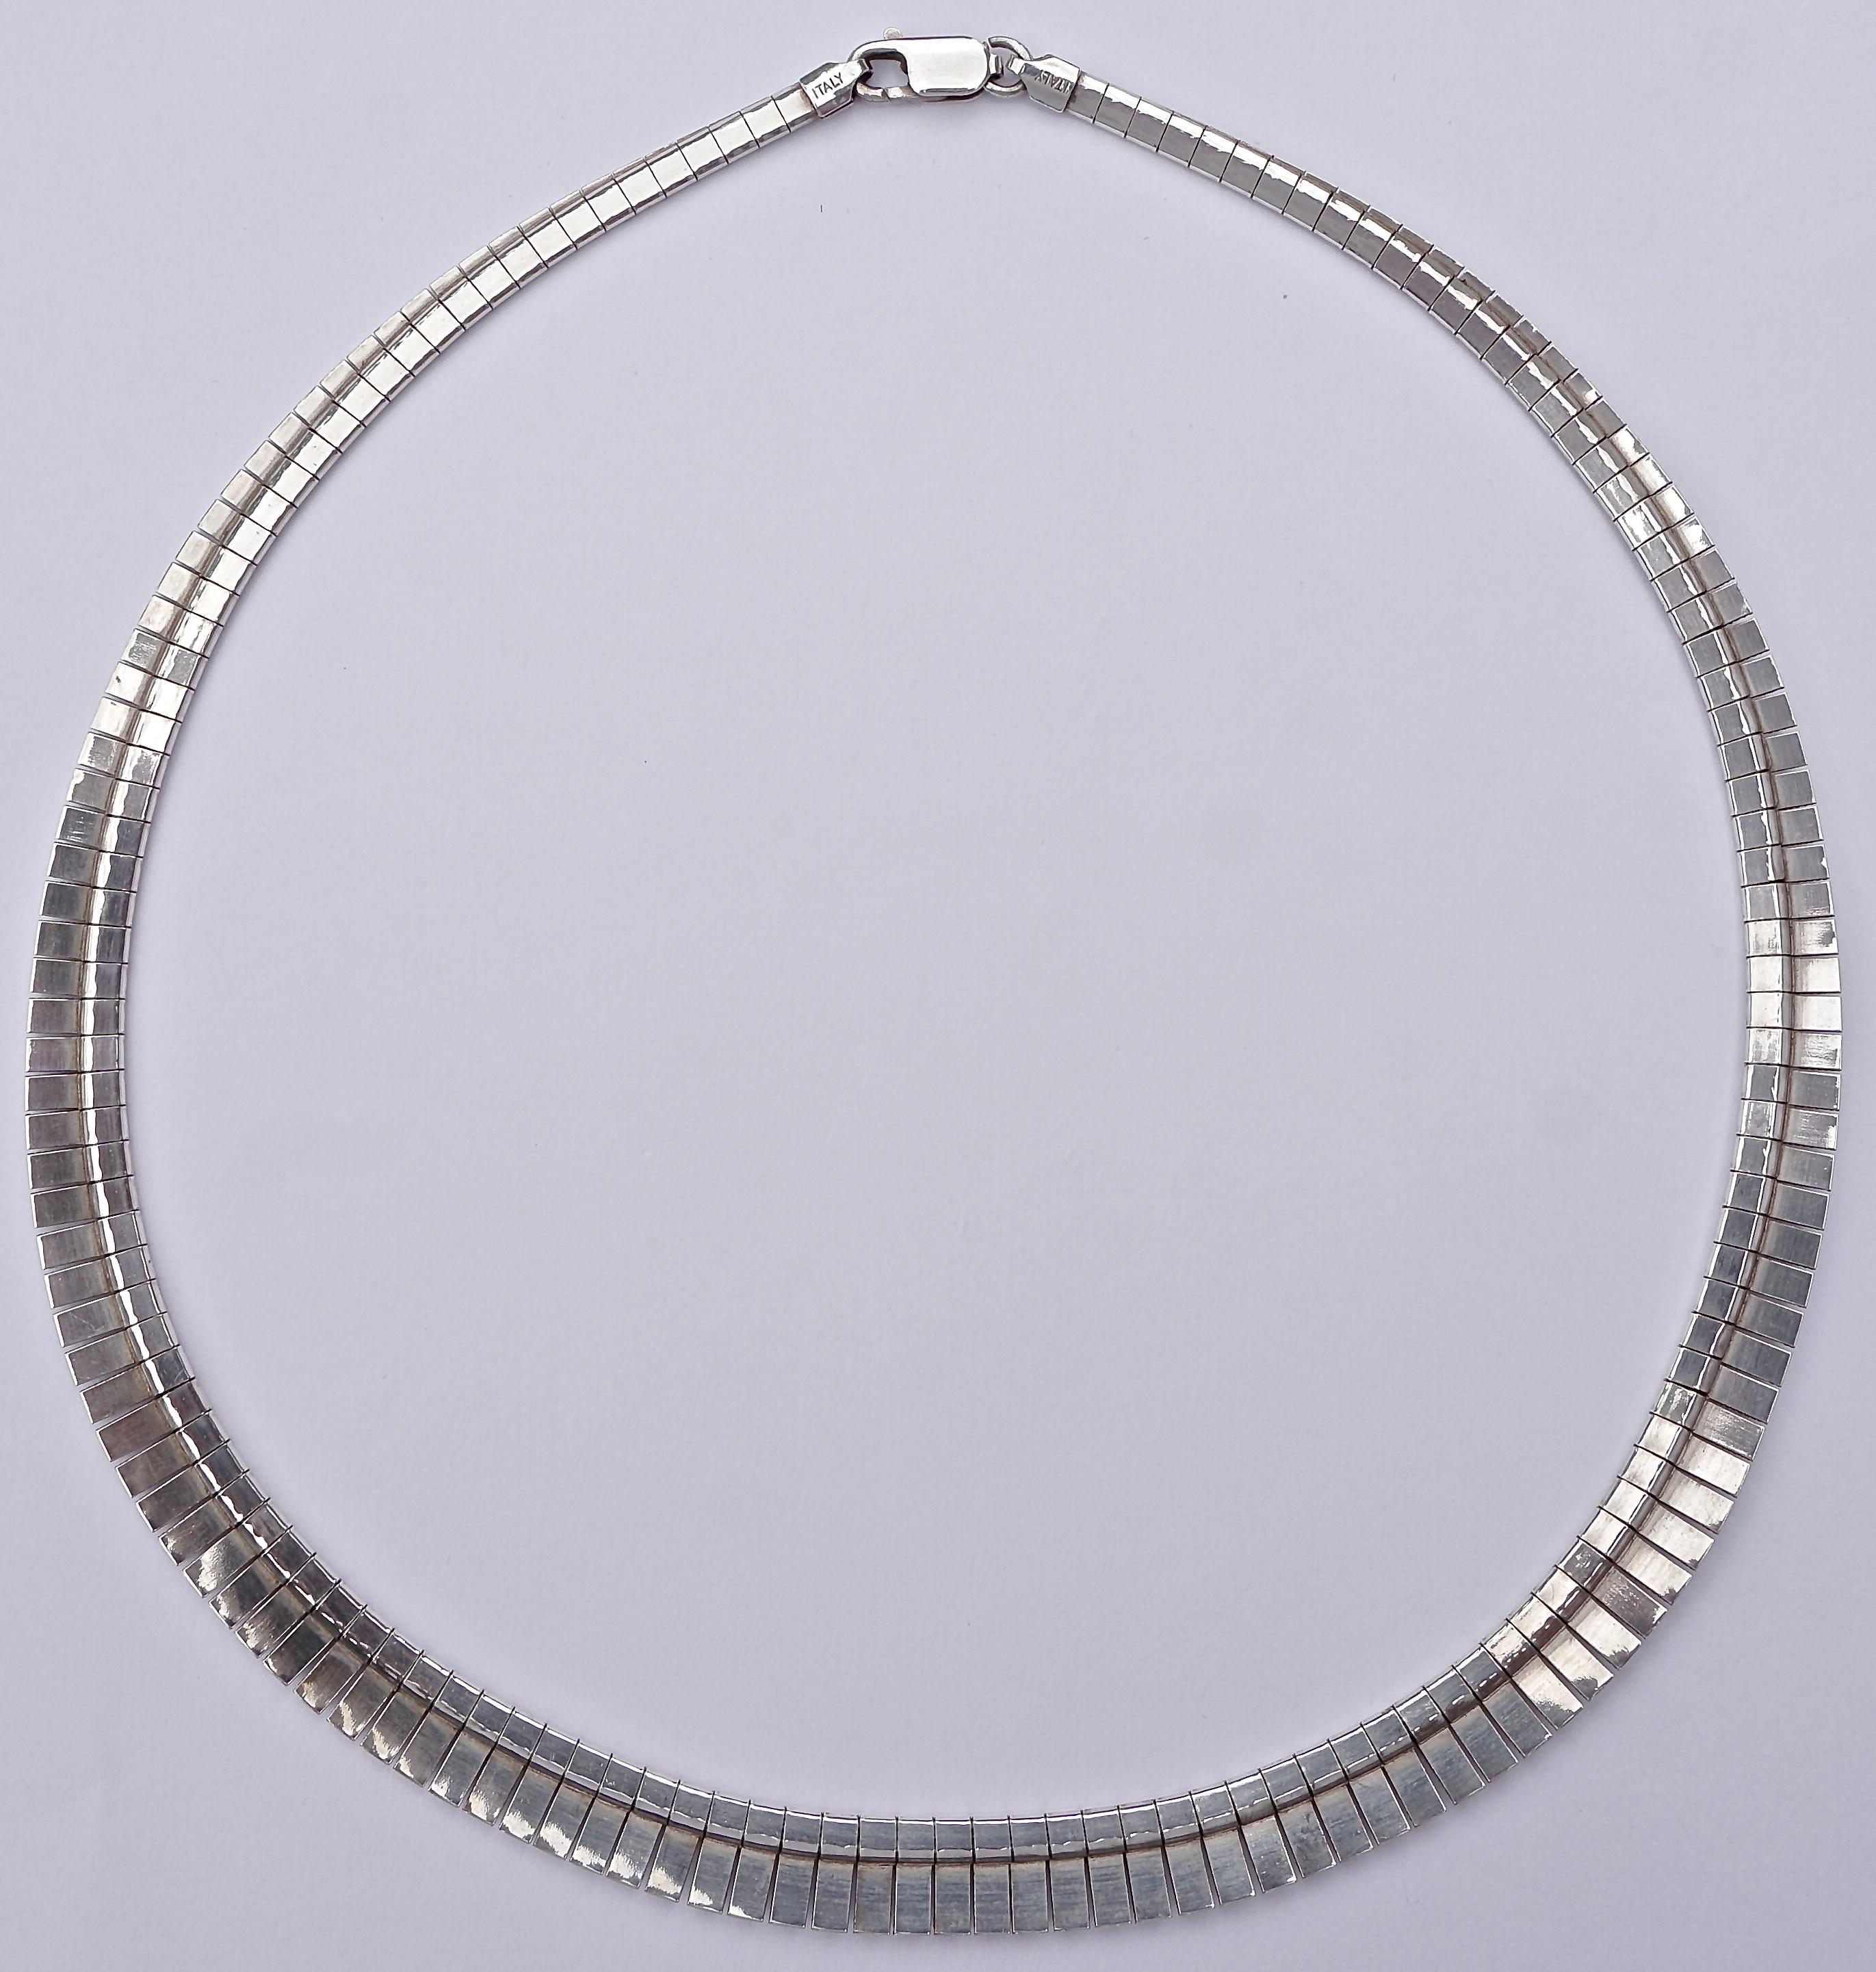 Egyptian style vintage sterling silver necklace featuring textured links with a lovely shiny geometric design, and edged in shiny silver. Length 45cm, 17.72 inches, the width graduates from 3mm, .12 inches at both ends, to 9mm, .35 inch, at the